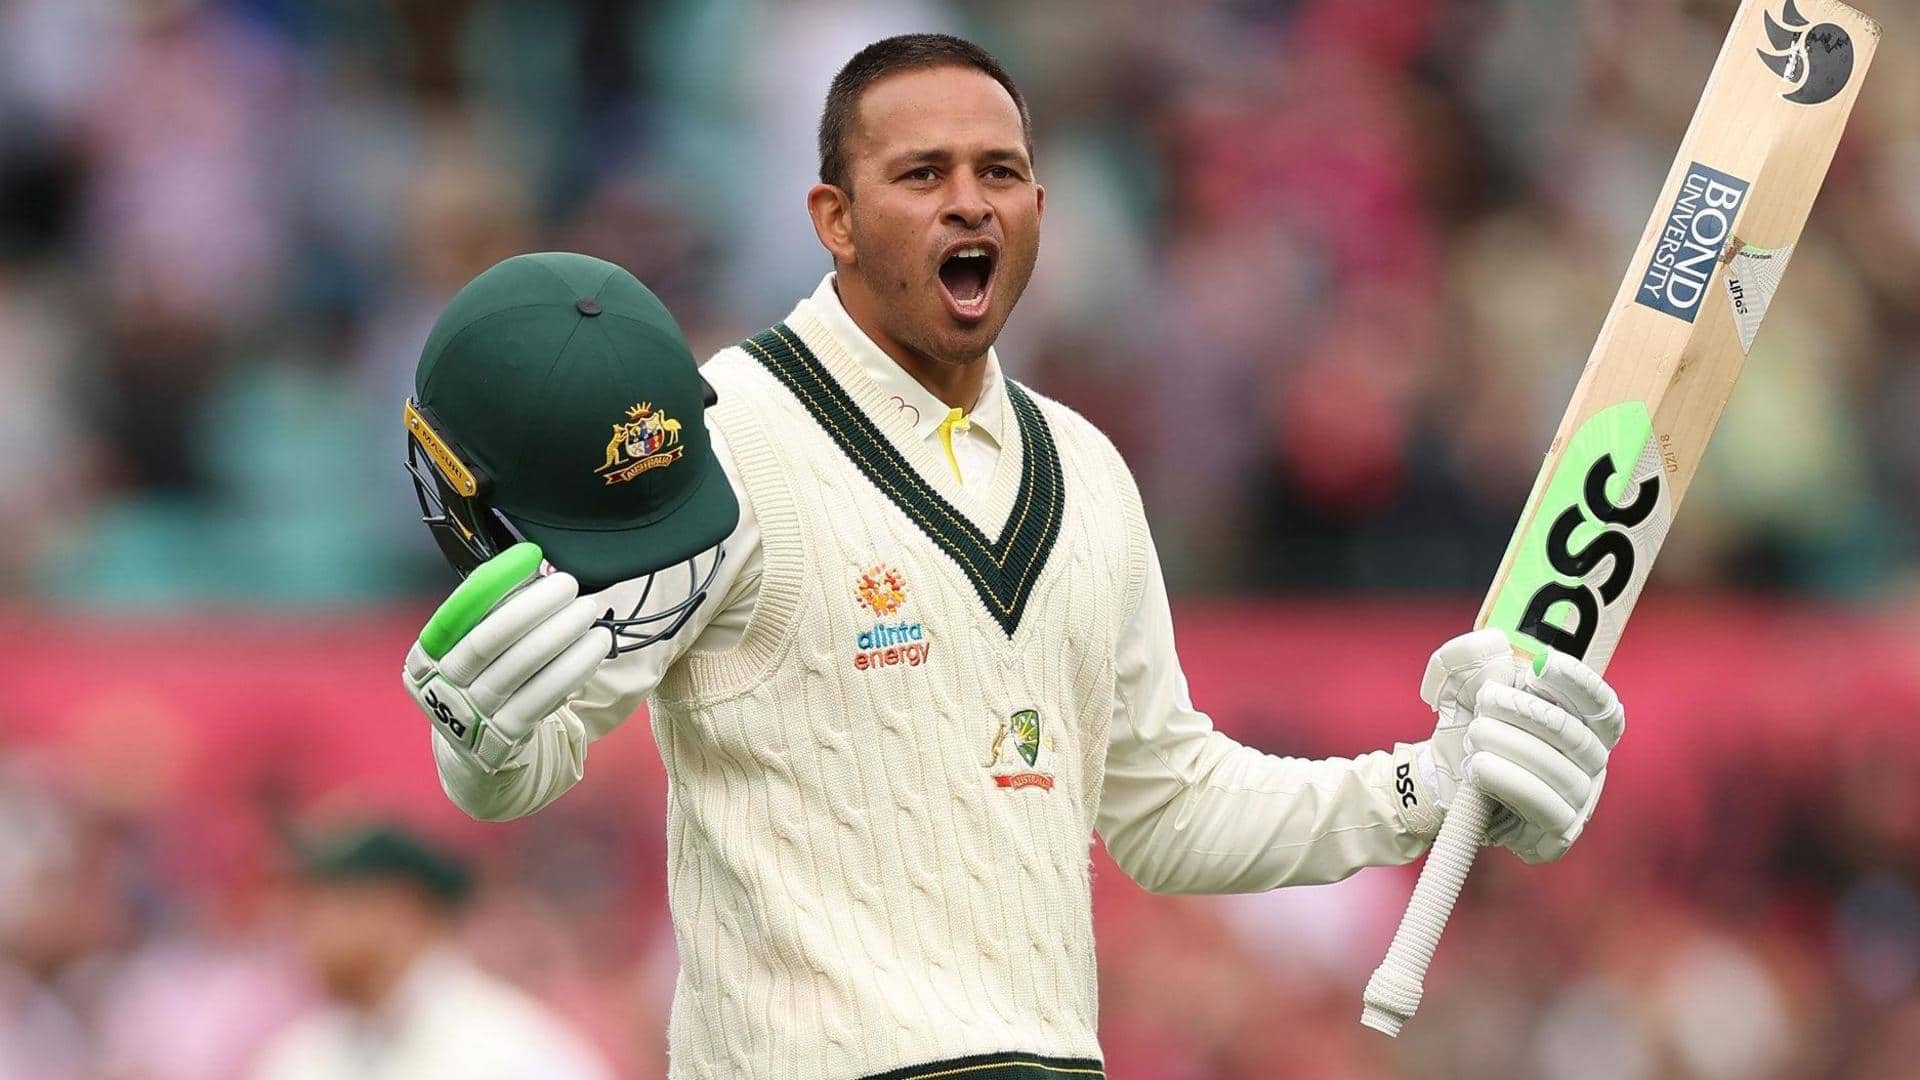 The Ashes, Usman Khawaja registers his 15th Test century: Stats